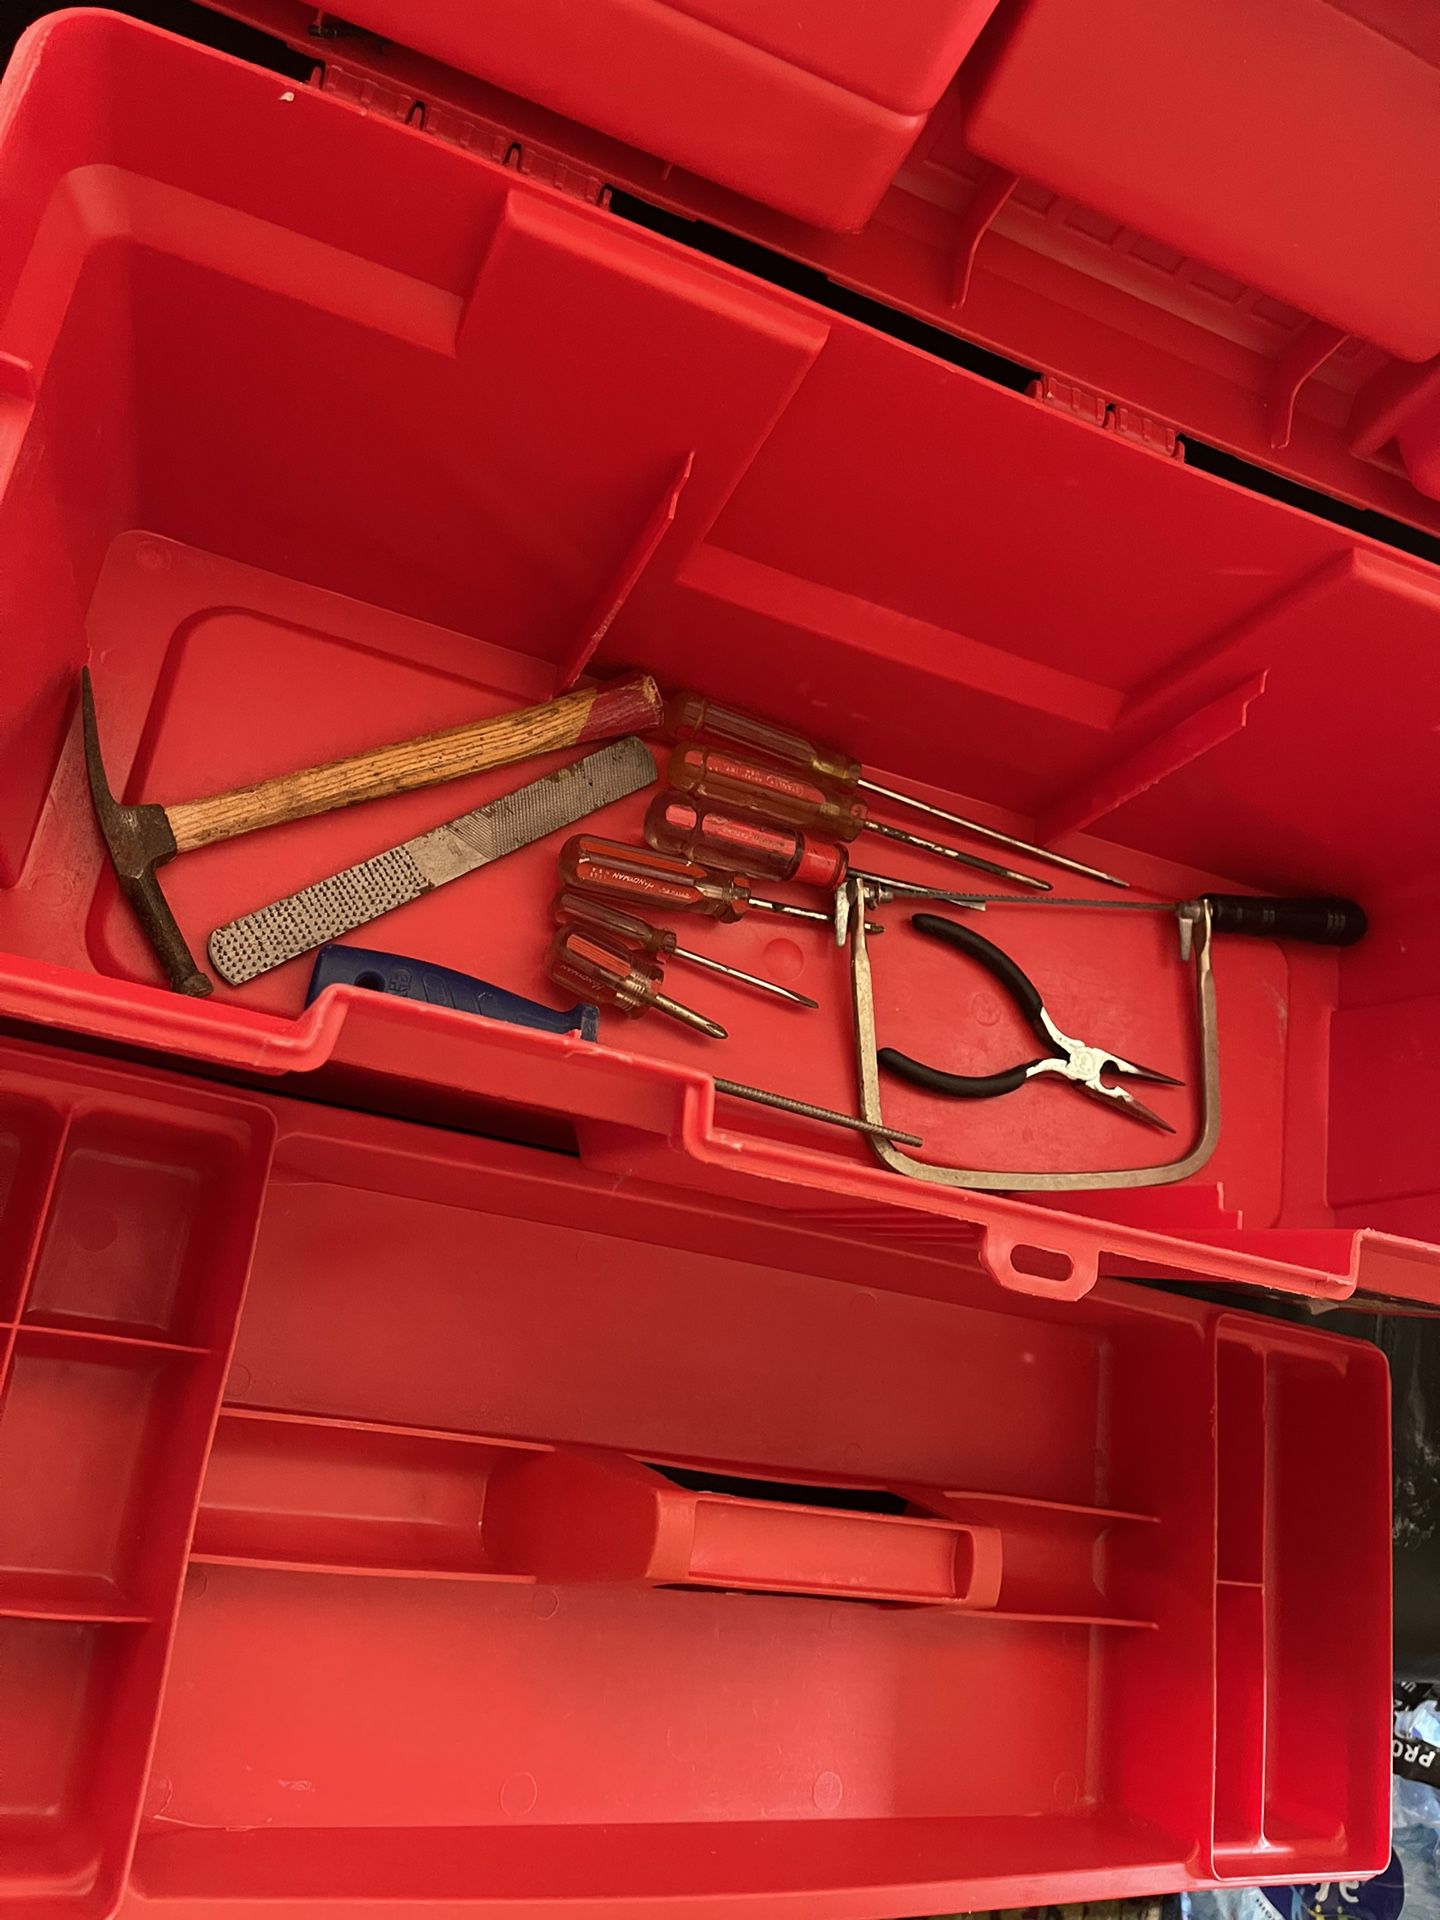 Tool Box With Some Tools Lots Of Storage Space 